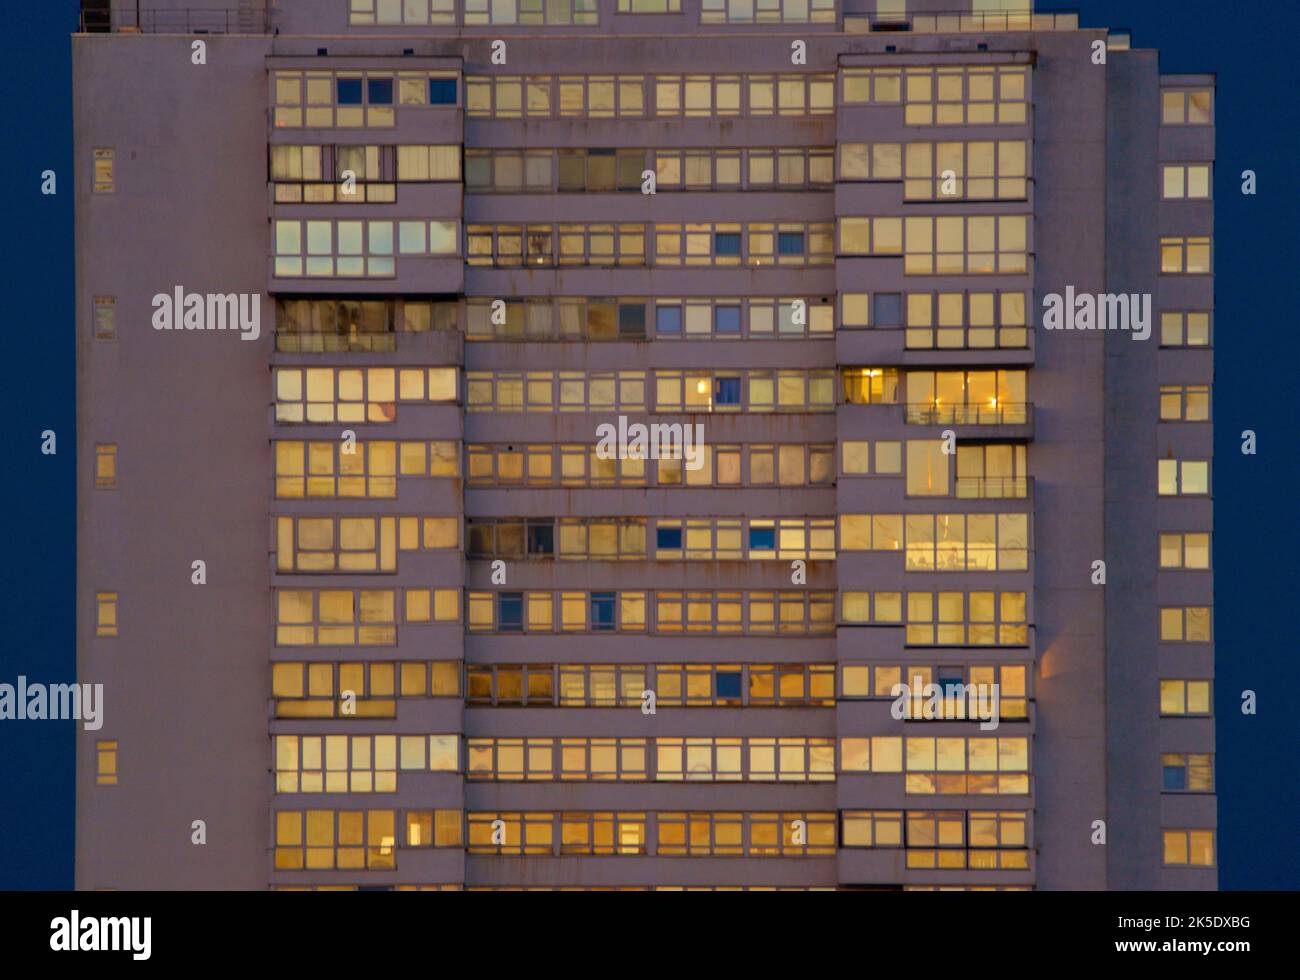 Sussex Heights, a residential tower block in the centre of Brighton, part of the English city of Brighton and Hove. Built between 1966 and 1968 it rises to 334 feet. Here photographed aglow with the windows reflecting the golden light of the setting sun. Stock Photo